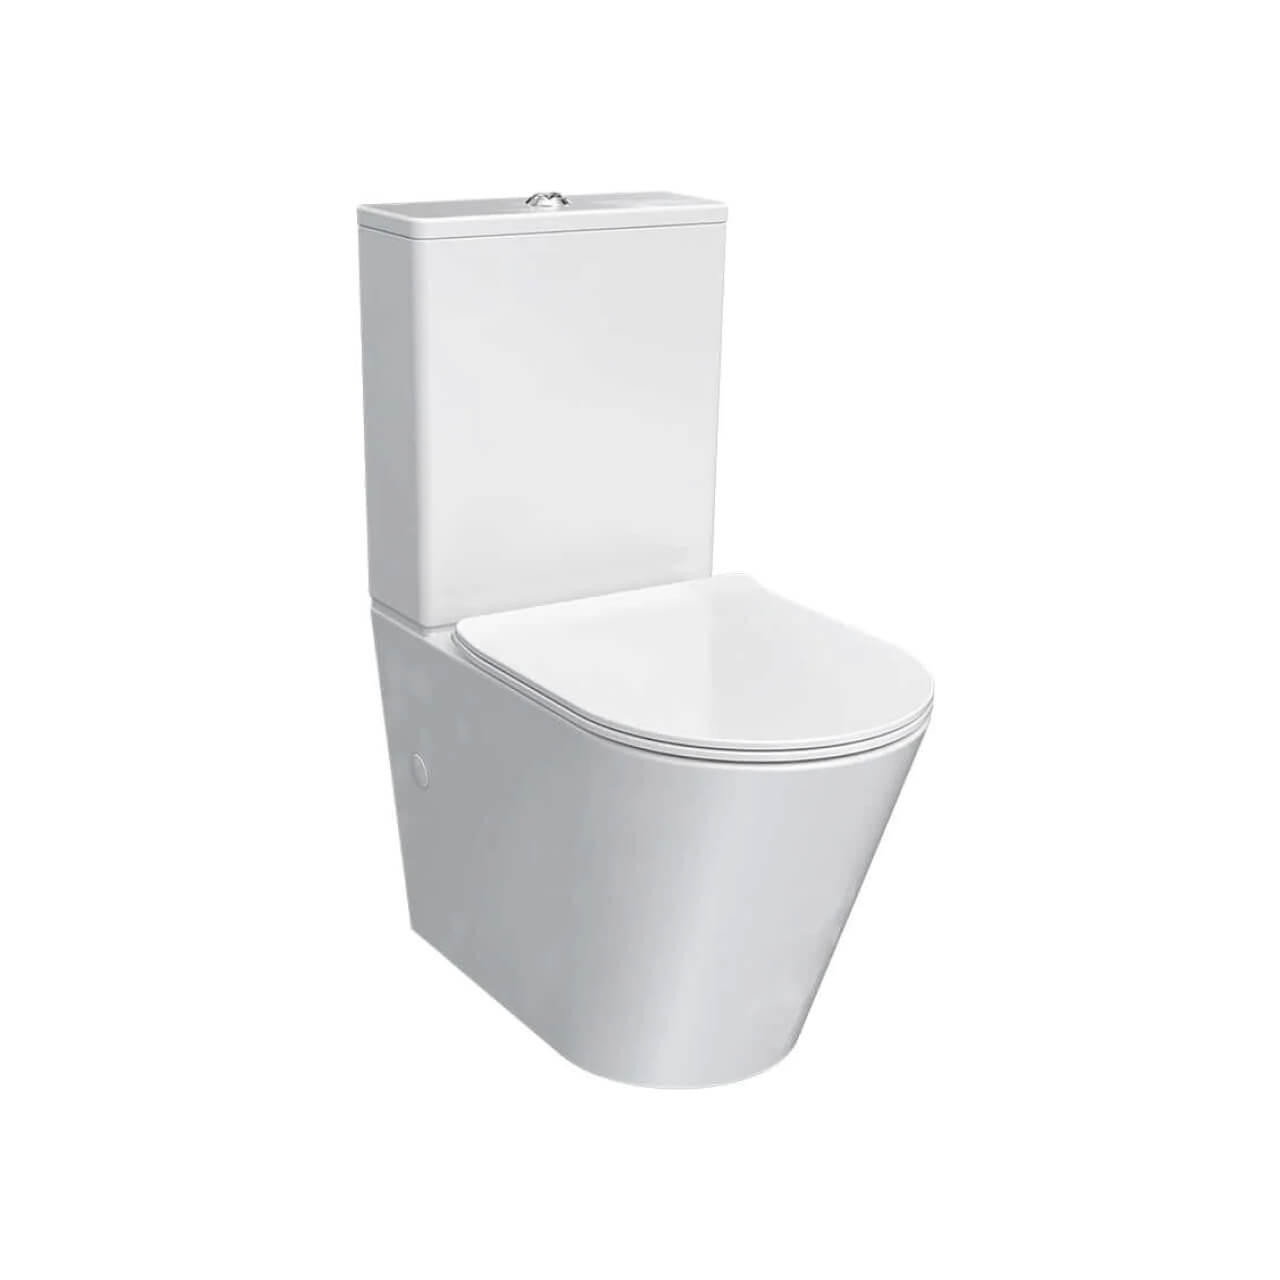  Parisi L'Hotel Wall Faced Suite Rimless Including Soft Close Seat PN730 